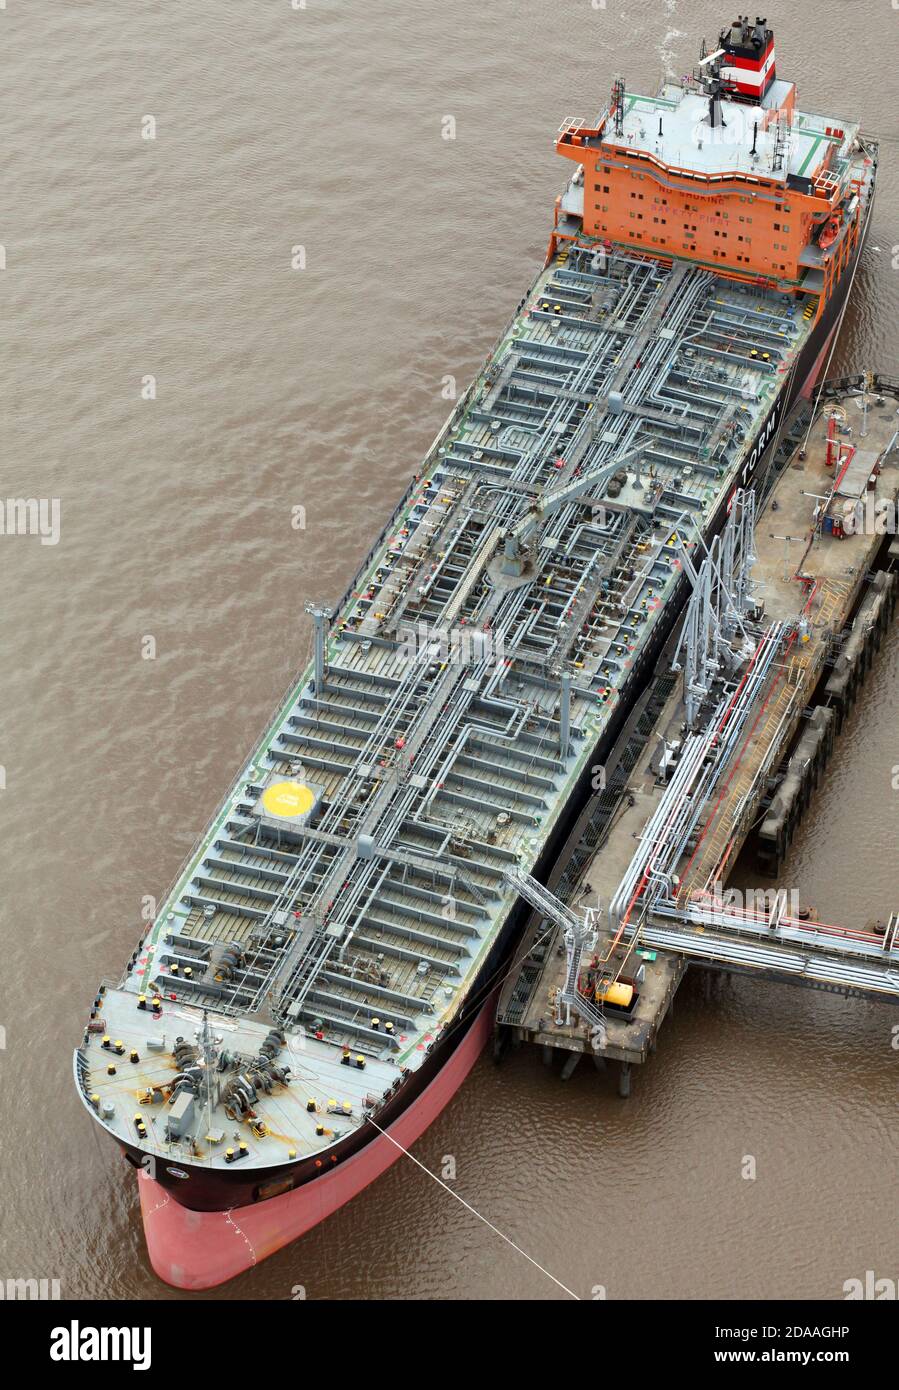 aerial view of Torm, a chemicals oil products tanker docked at Immingham, UK Stock Photo